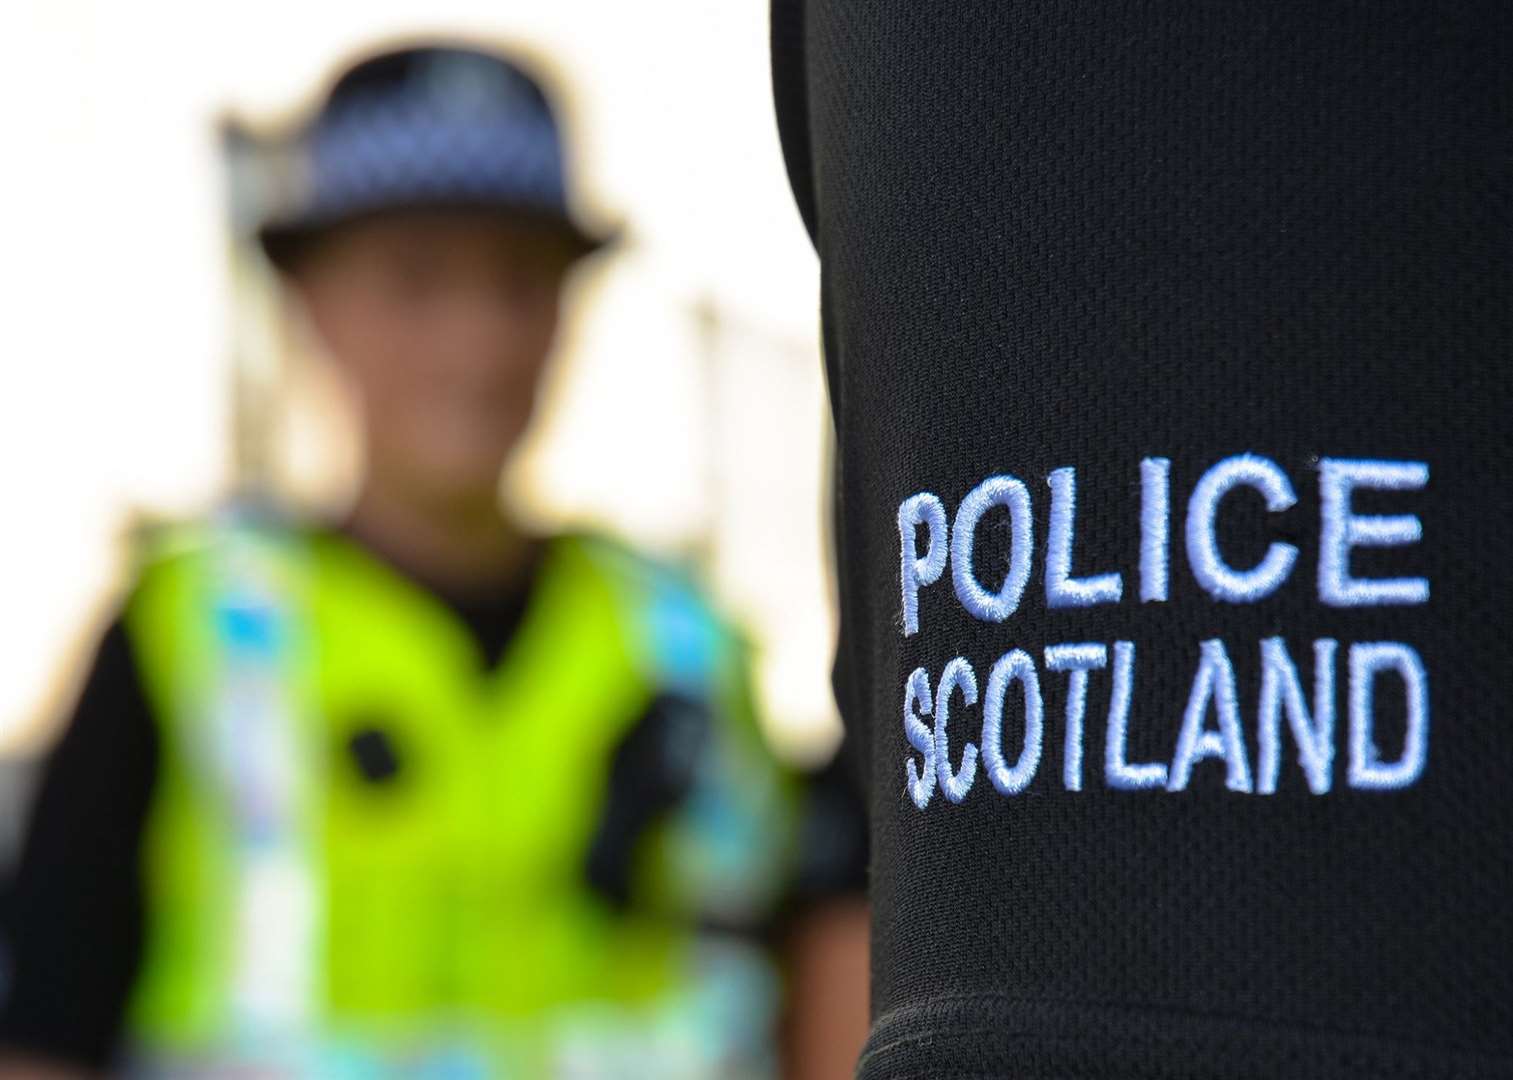 Police Scotland arrested three people in connection with the offences.